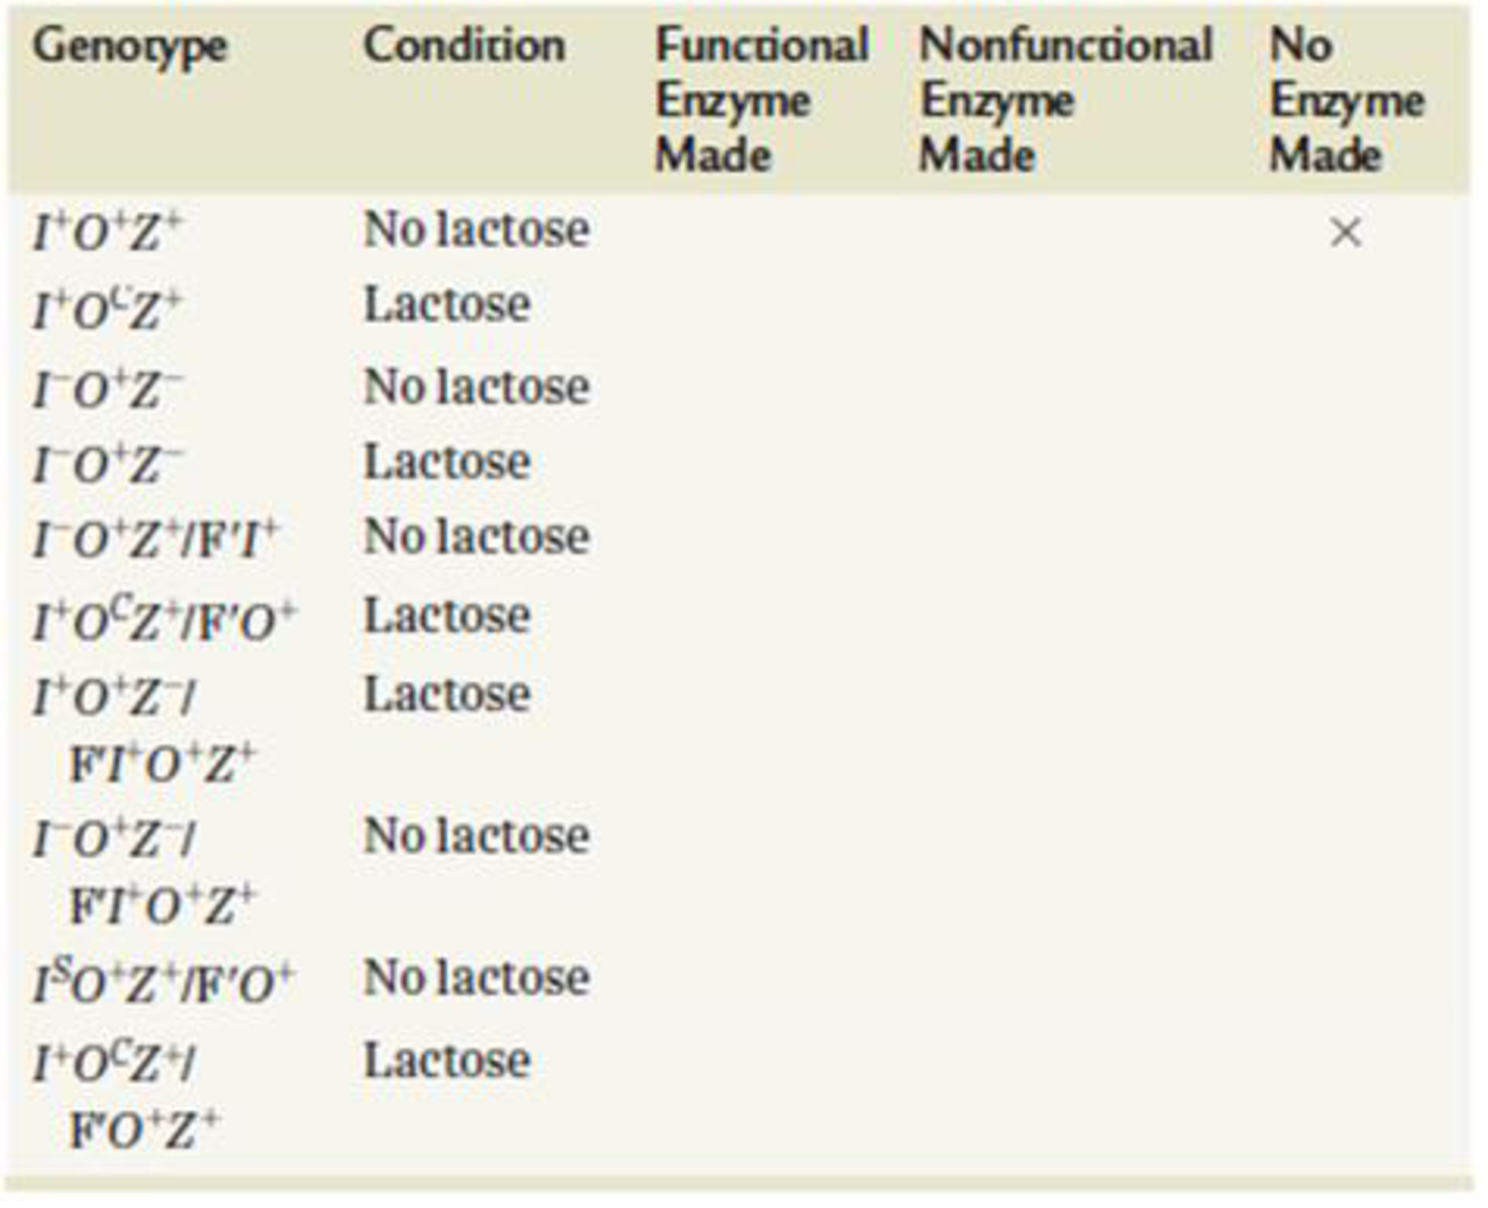 Chapter 16, Problem 6PDQ, For the genotypes and conditions (lactose present or absent) shown in the following table, predict 